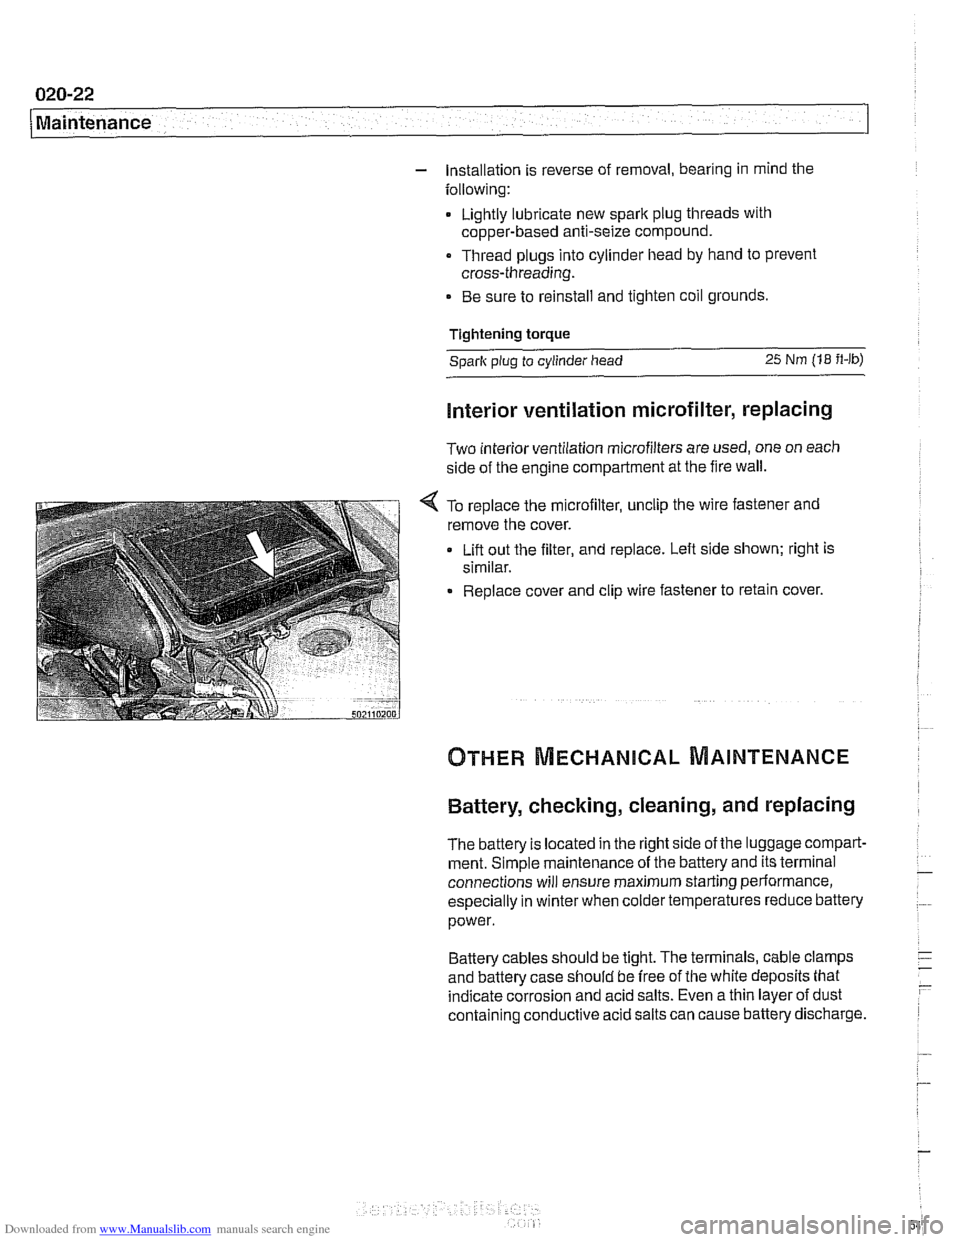 BMW 525i 2001 E39 Workshop Manual Downloaded from www.Manualslib.com manuals search engine 
020-22 Maintenance 
1 
- Installation is reverse  of removal,  bearing in mind  the 
following: 
Lightly lubricate  new 
spark plug  threads  